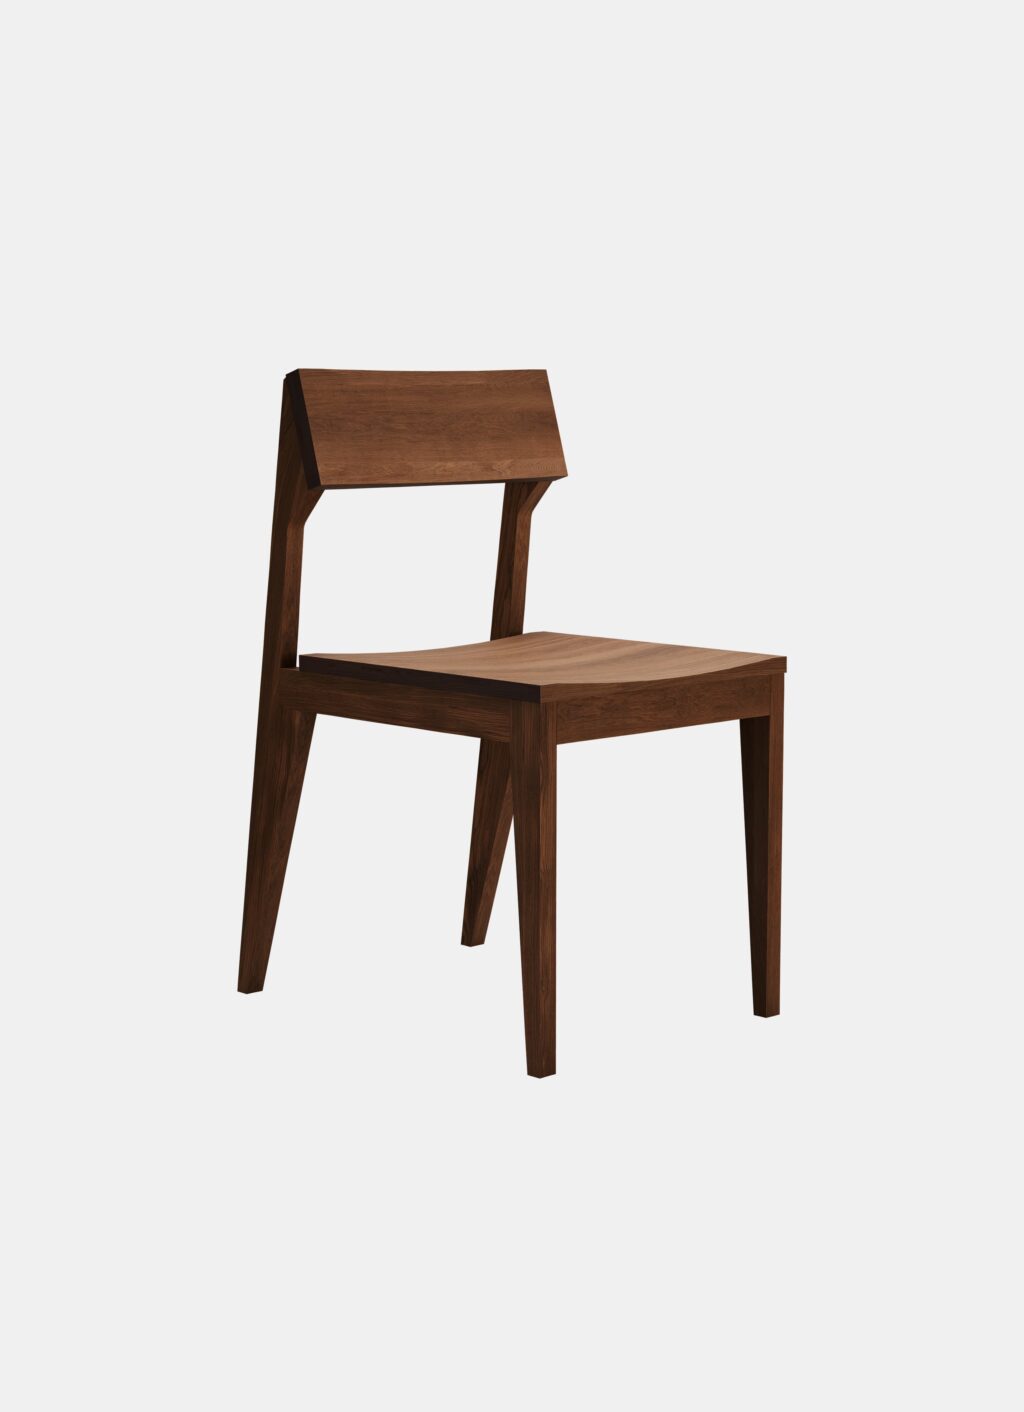 Objekte unserer Tage - OUT - Schulz - Chair - various woods